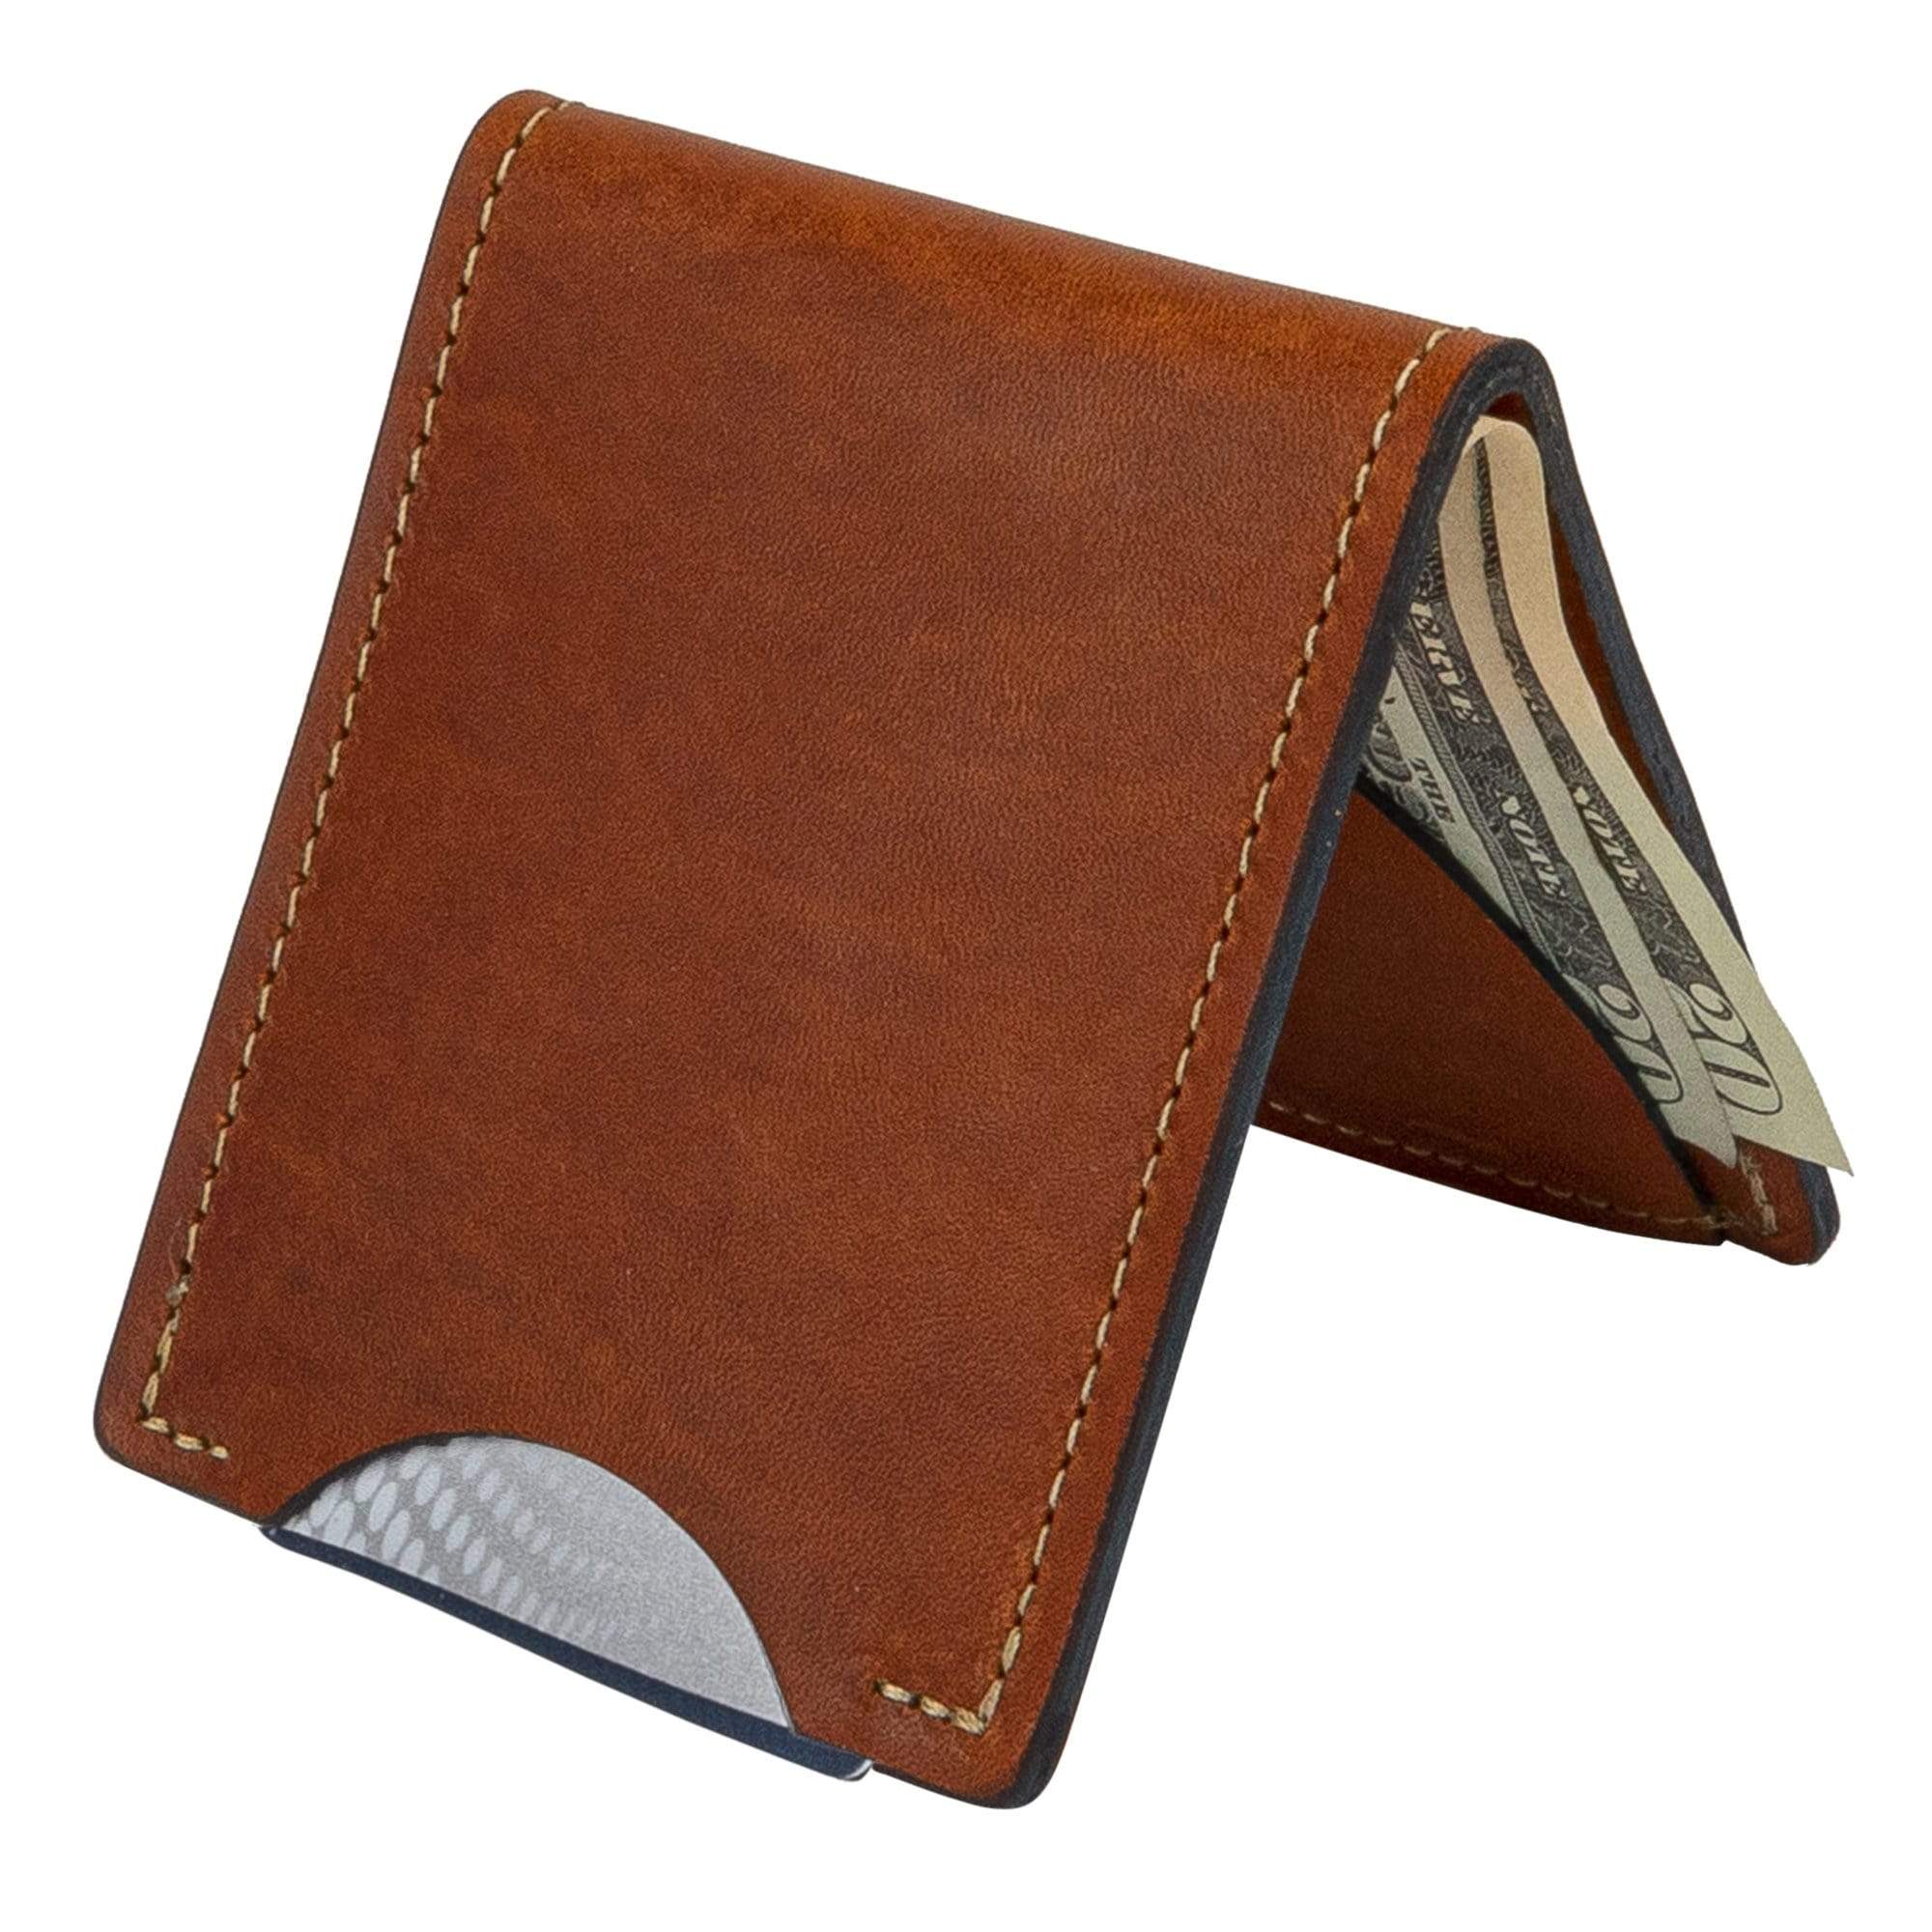 Opinions on Slender Wallet? Thinking of gifting it for husbands